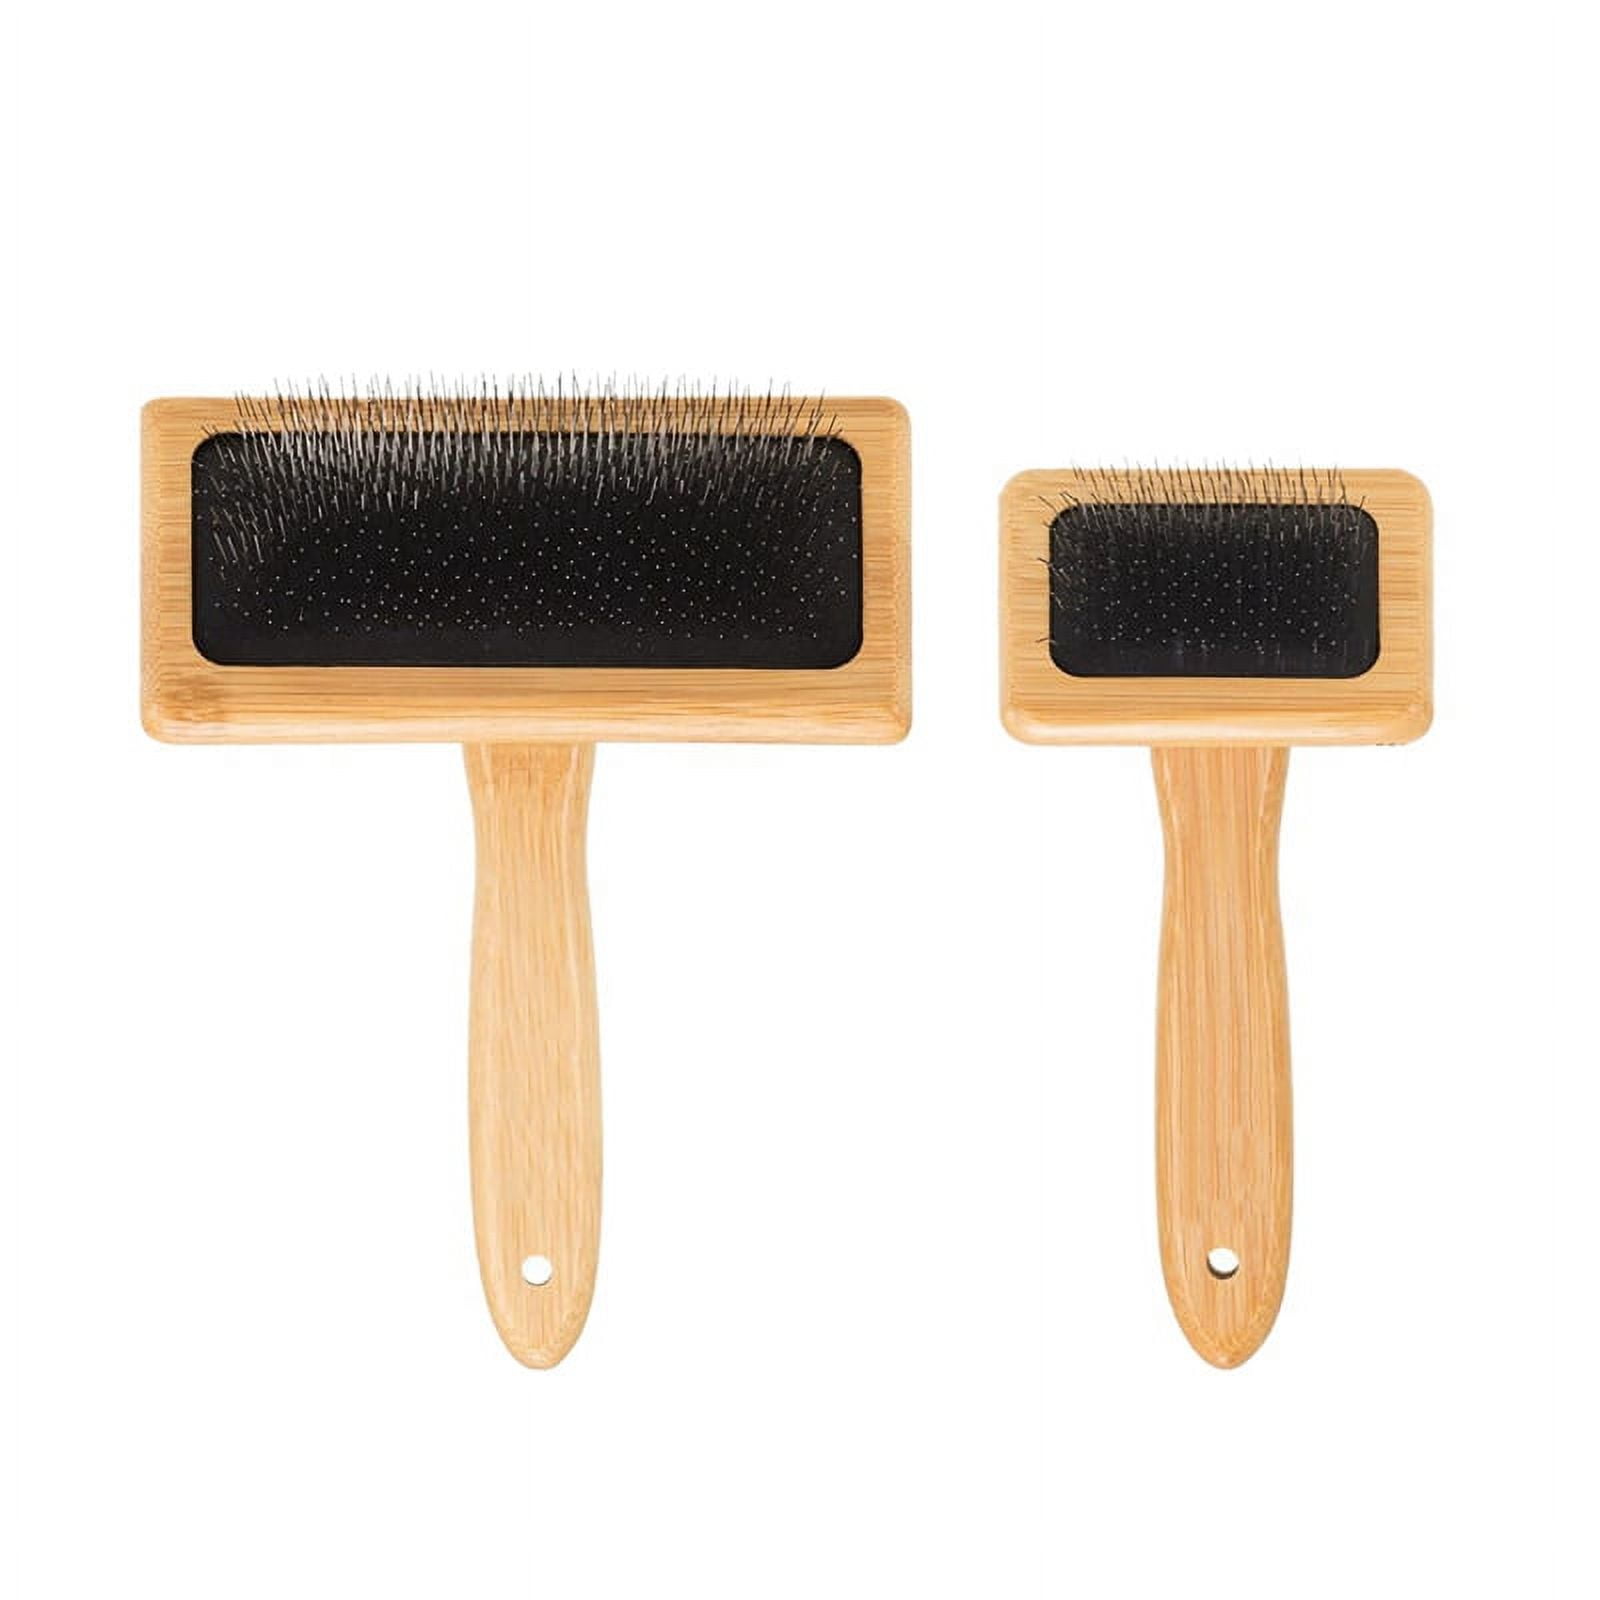 2PCS Wool Carders, Hand Carders for Wool, Craft Wool Felt Mixing Tool, Pet  Slicker Brush Grooming Comb, Needle Felting Tool with Wooden Handle, Wool  Coat Carding Brushes 